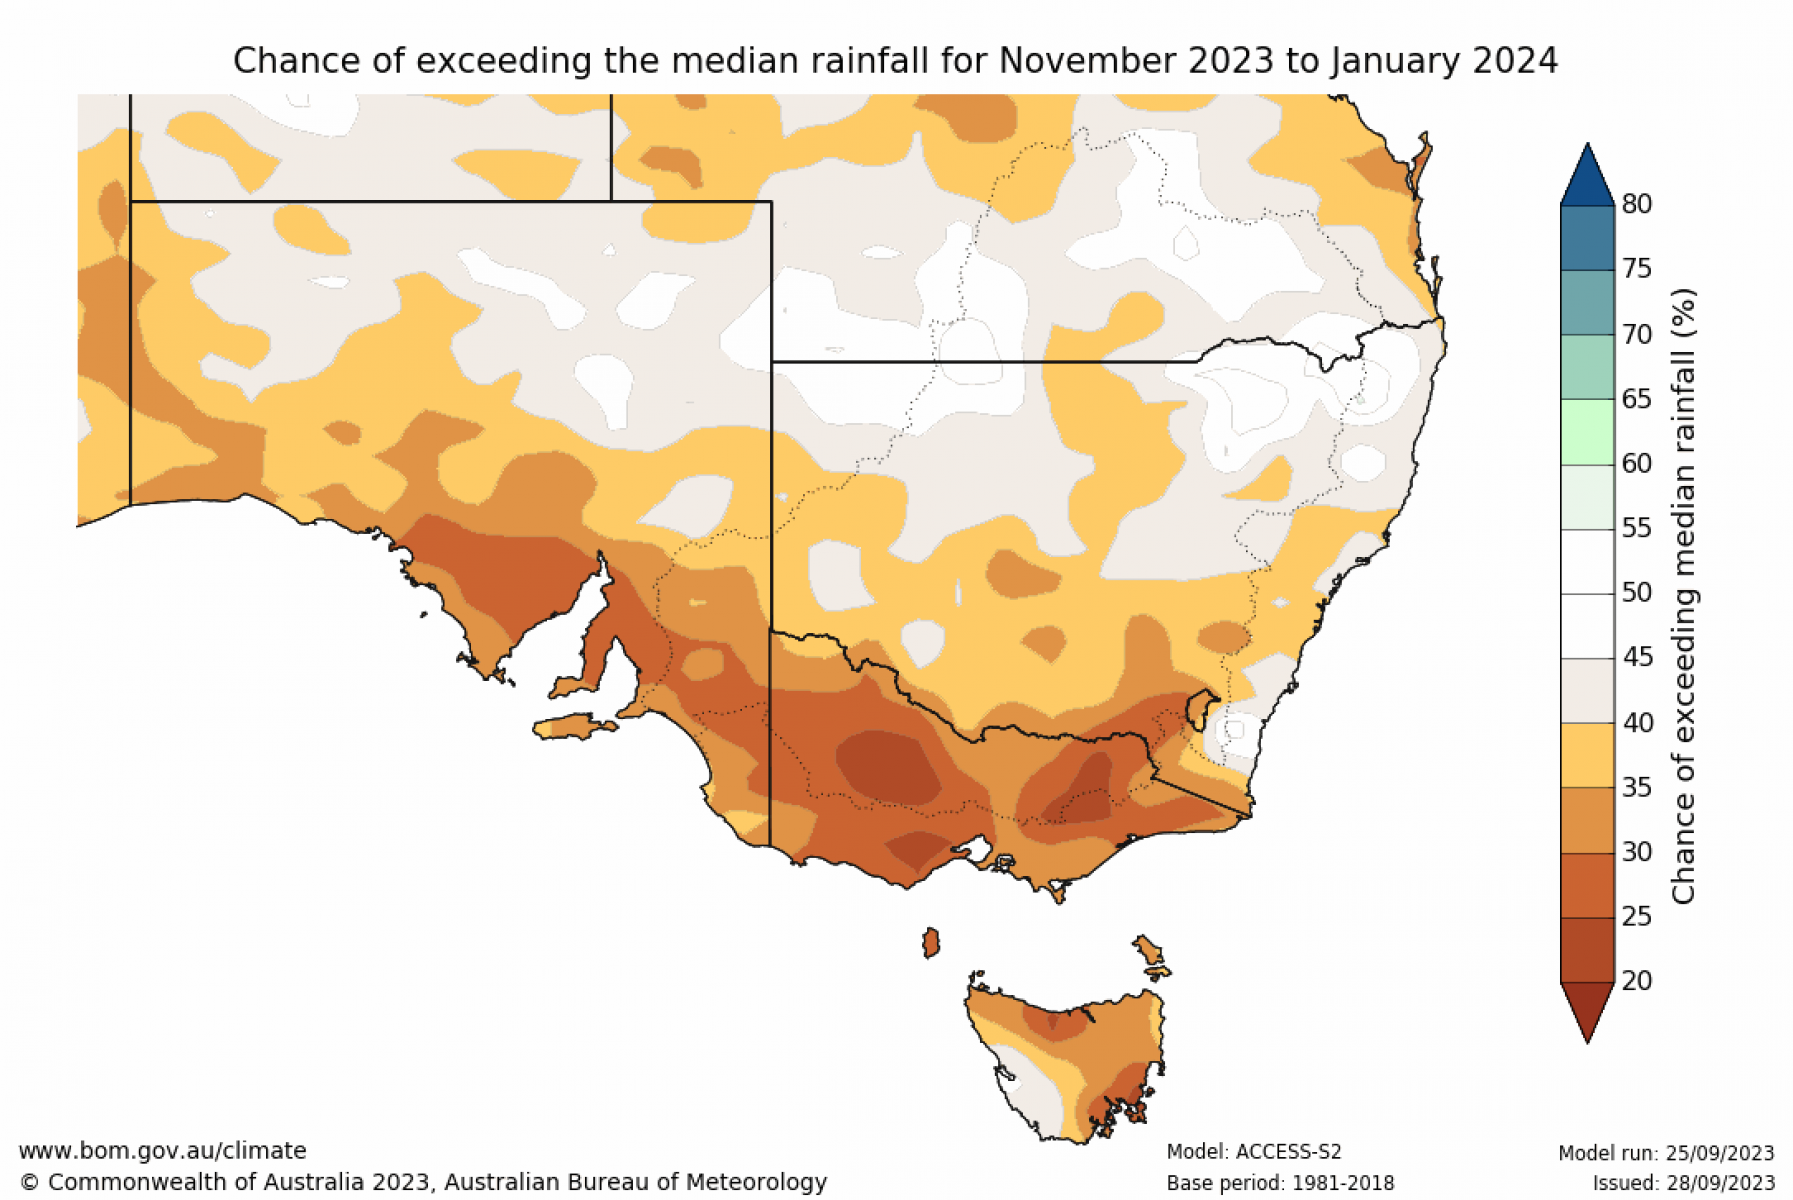 Chance of exceeding median rainfall for November to January 2023